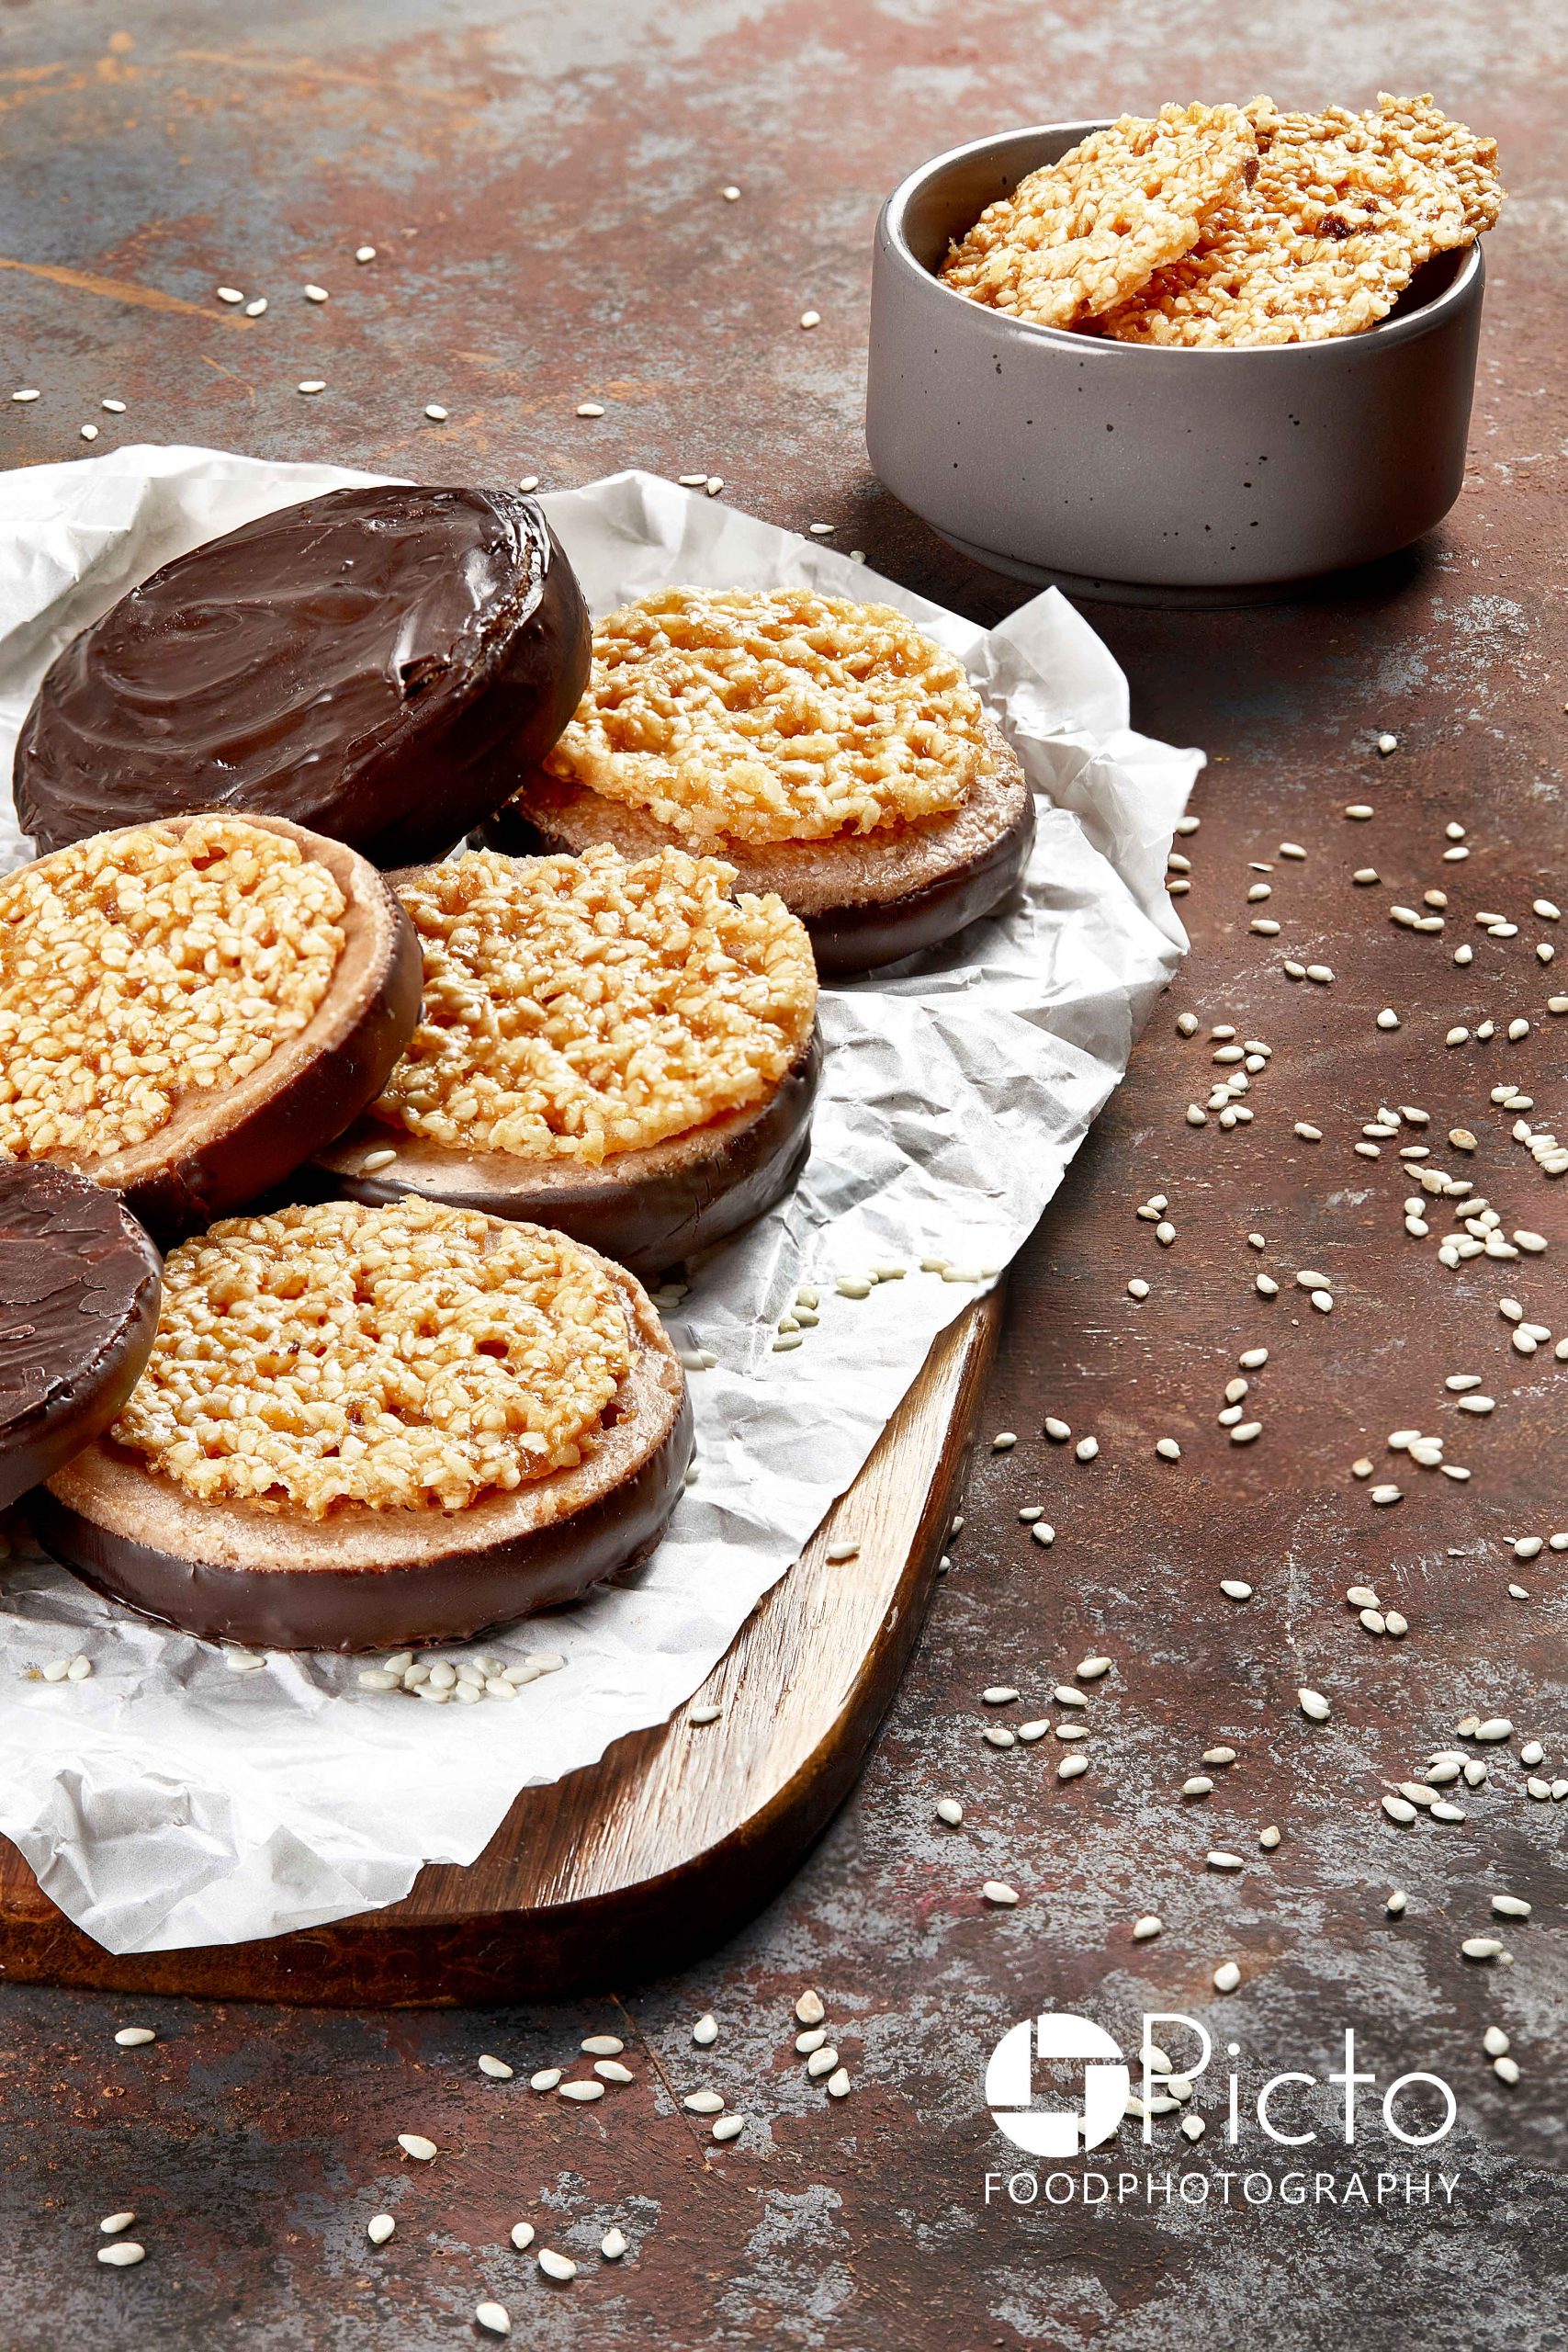 salimi-Sesame-Chocolate-Biscuits-pictofoodphotography.com